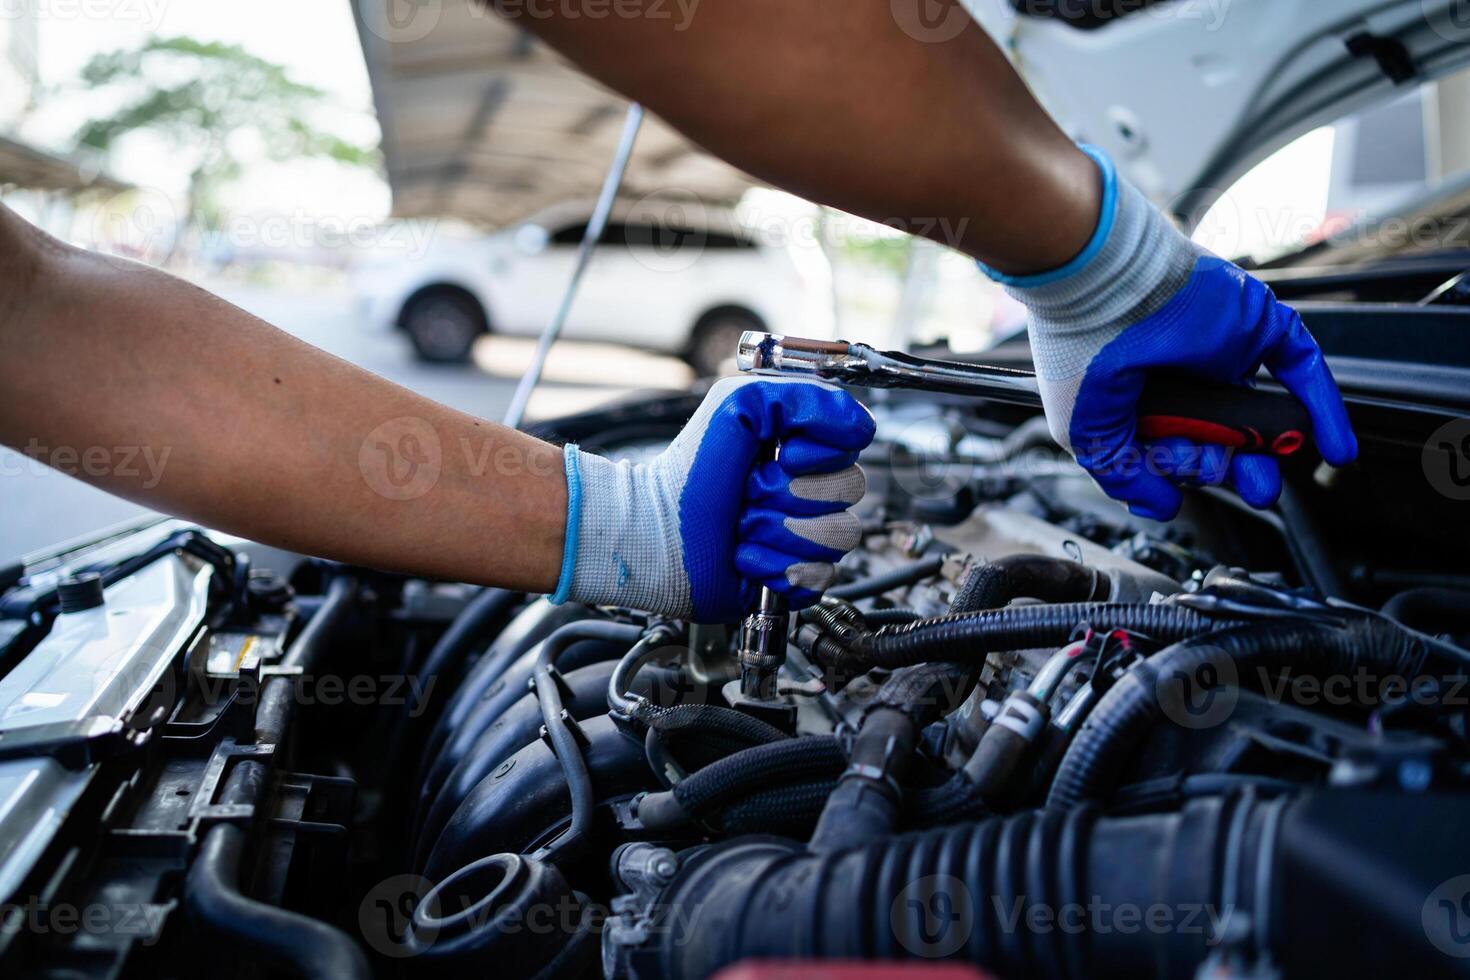 A mechanic is working on a car engine, wearing blue gloves. The car is parked next to a white car photo